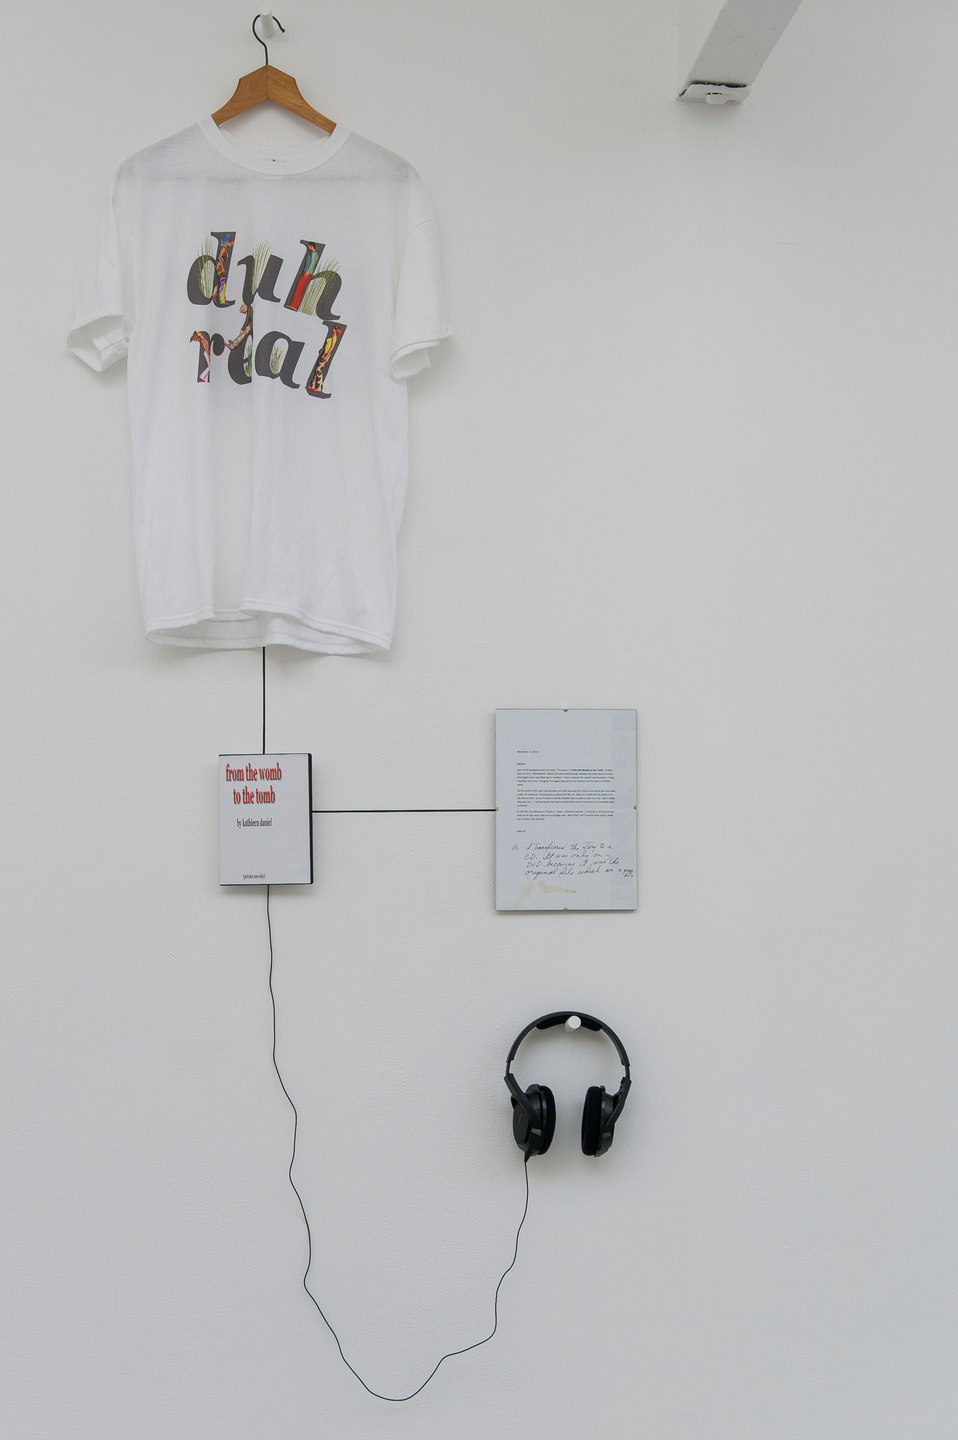 Kathleen Daniel, From the Womb to the Tomb, 2012, mp3 file, duration 51 mins 30 secs, digital print on DVD box cover, digital print on T-shirt, framed letter from the artist to the curator, Cell Project Space